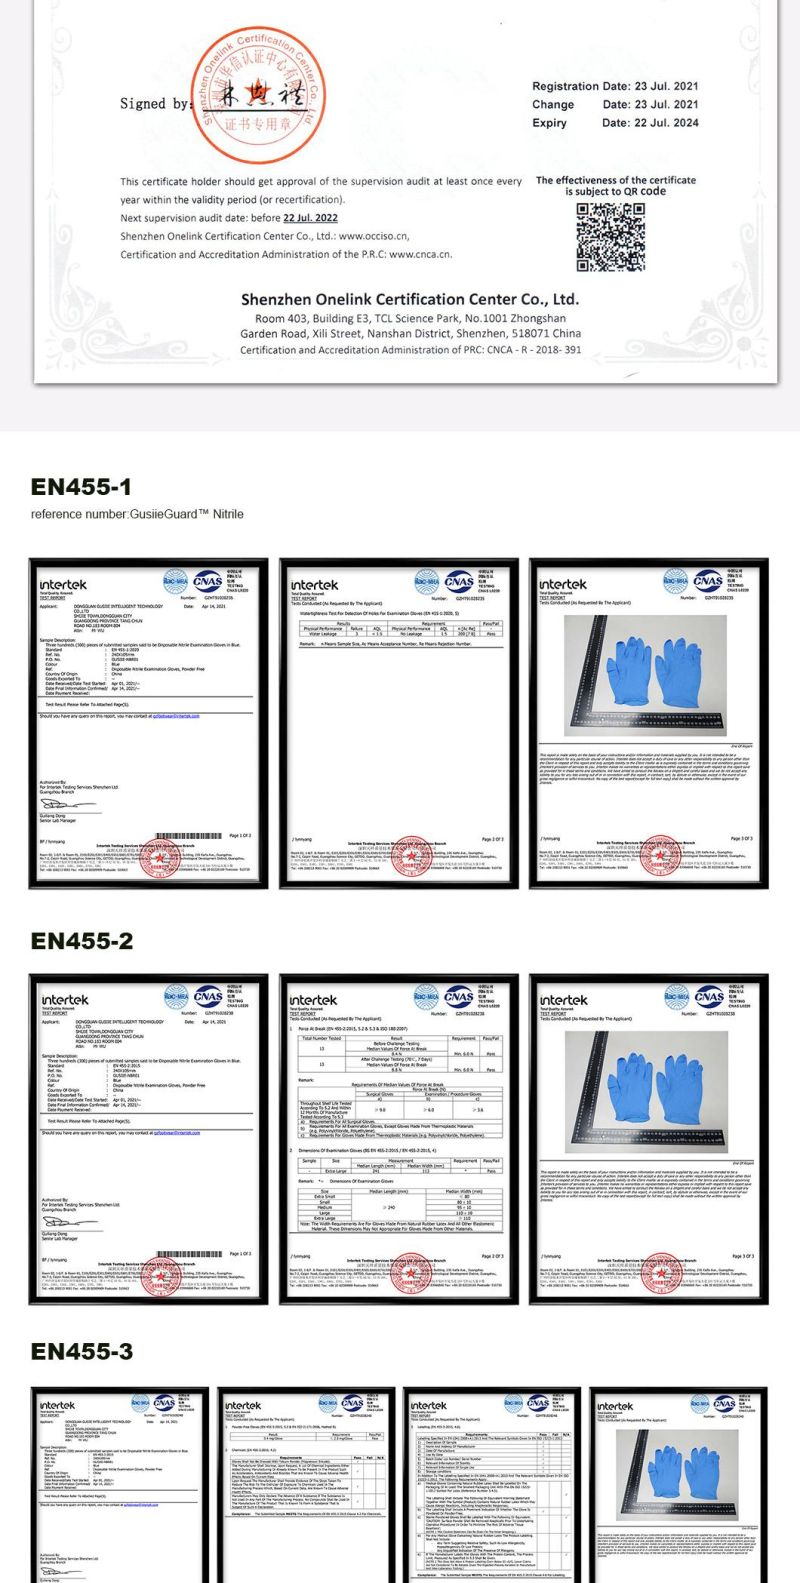 Gusiie Wholesale Cleanroom Workshop Good Quality with Competive Disposable Powder Free Nitrile Latex Medical Examination Large Gloves